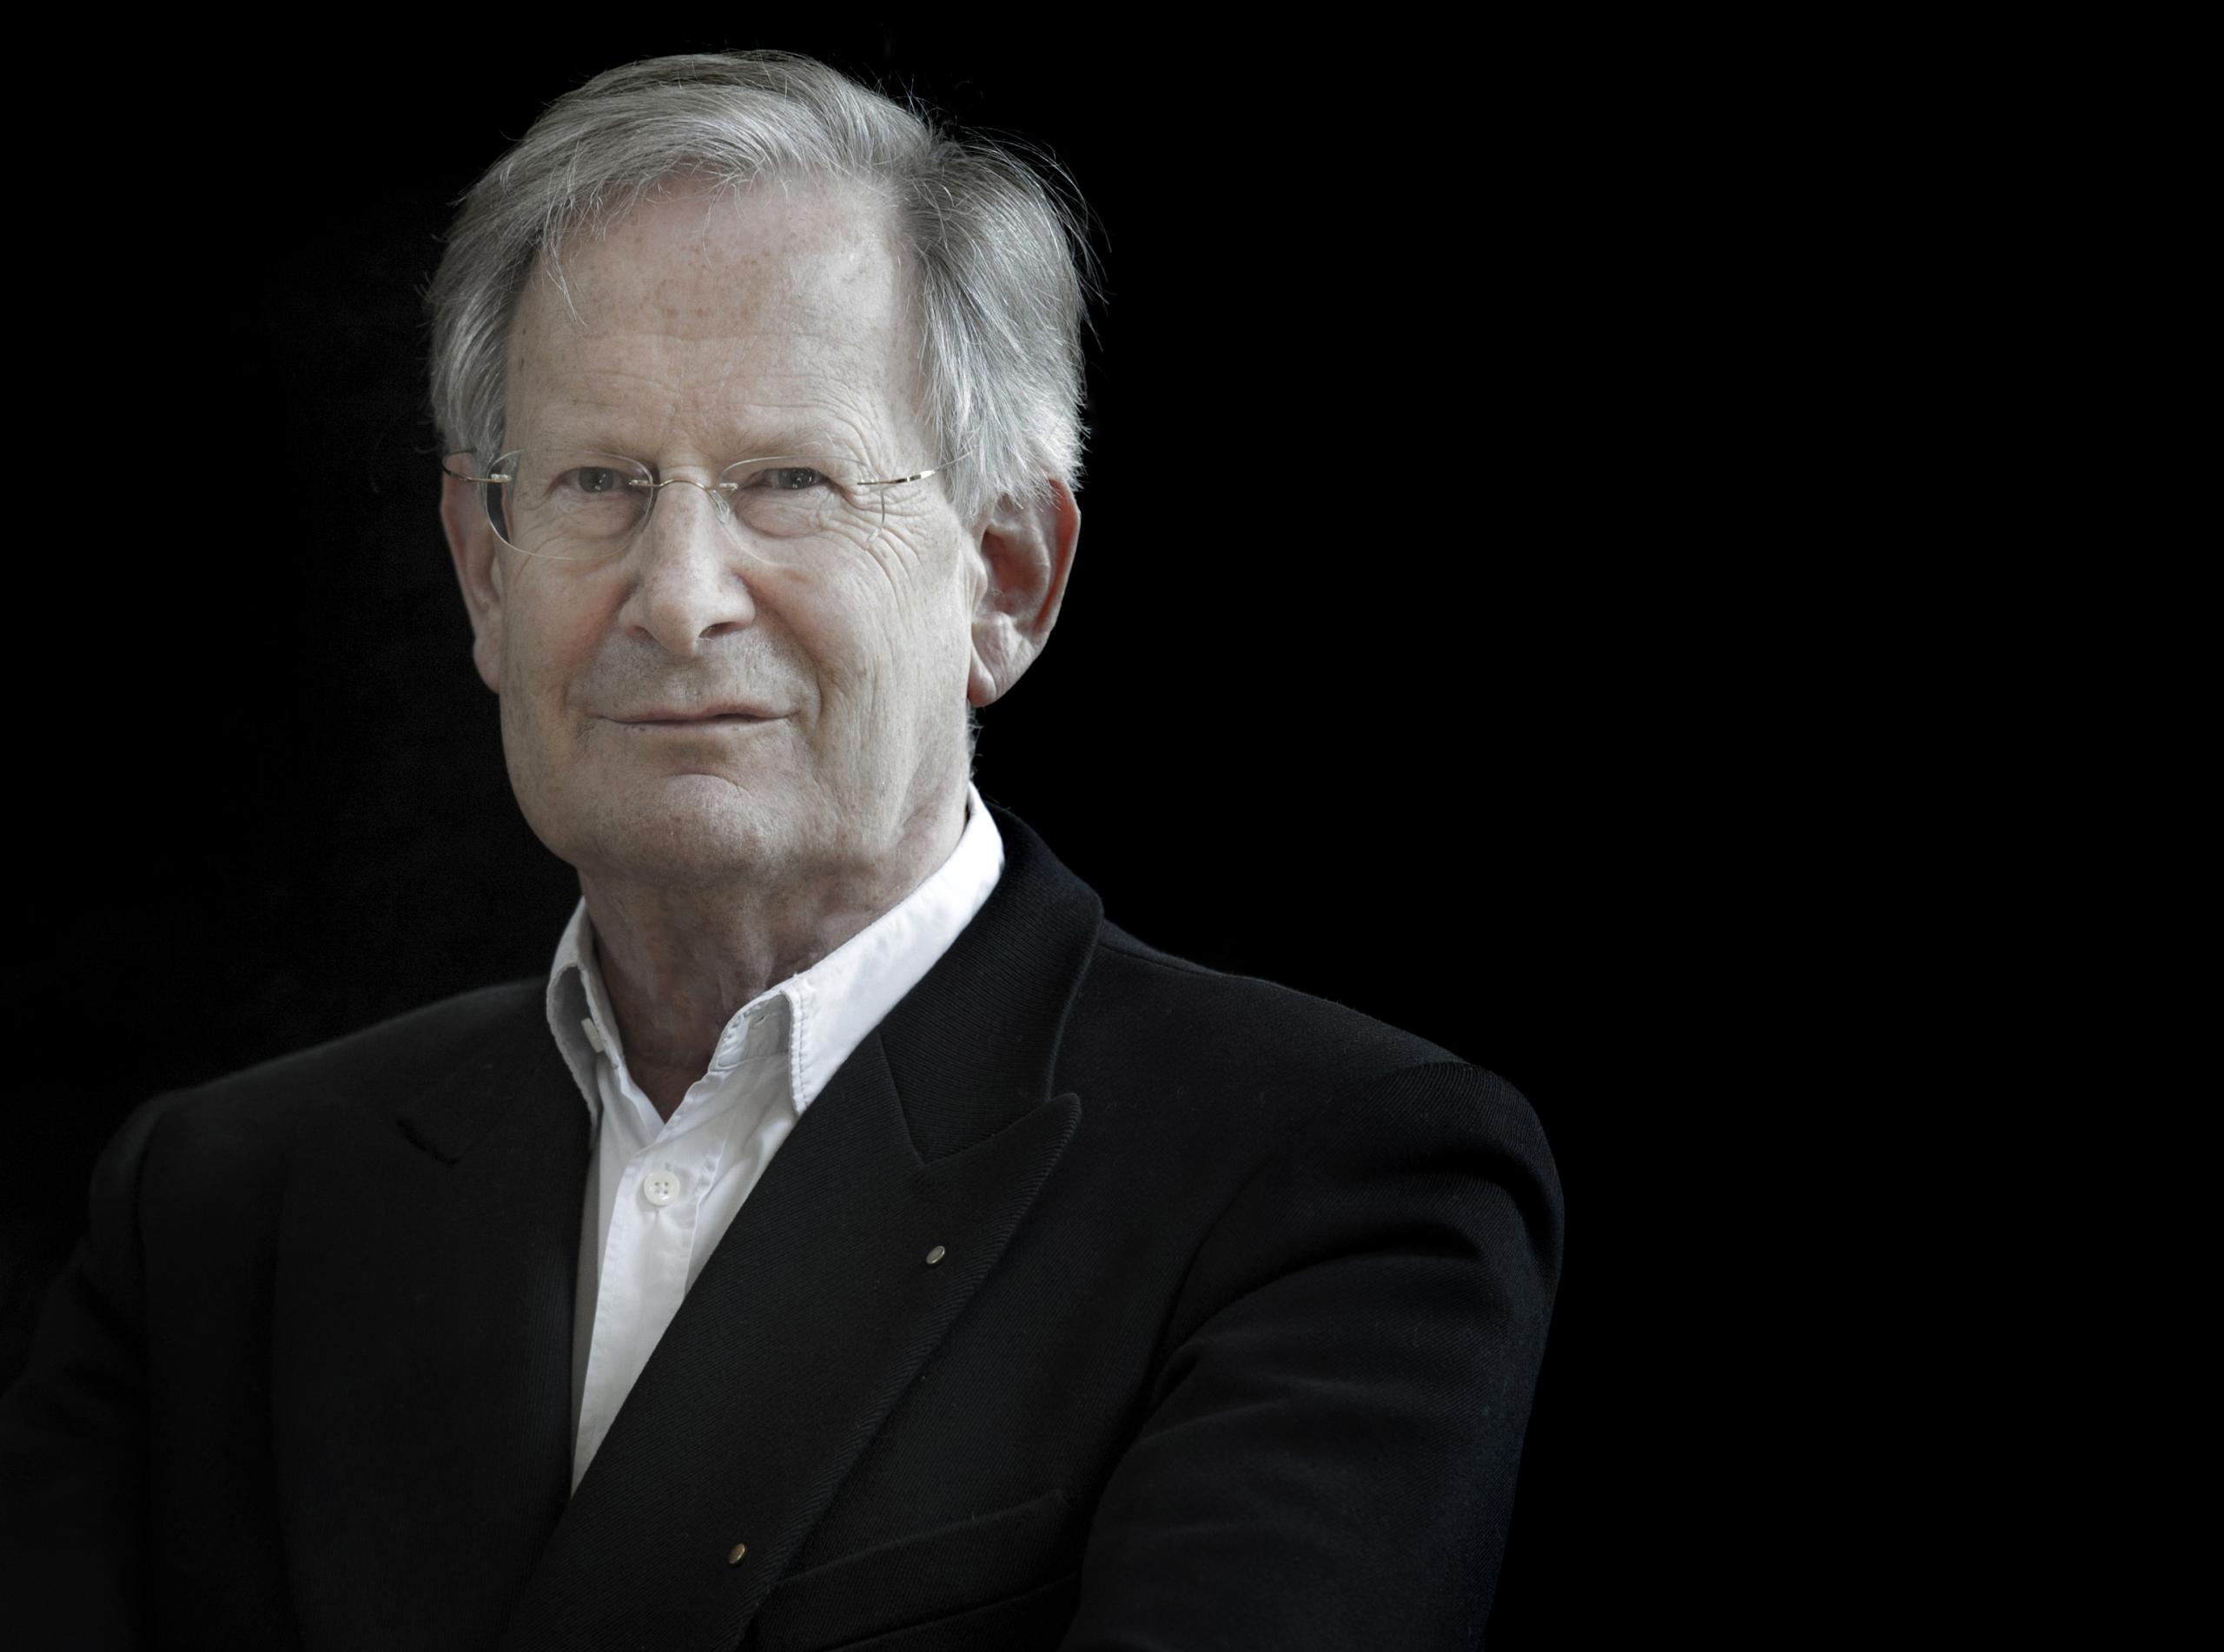 Portrait shot of conductor Sir John Eliot Gardiner smiling at the camera against a black background.